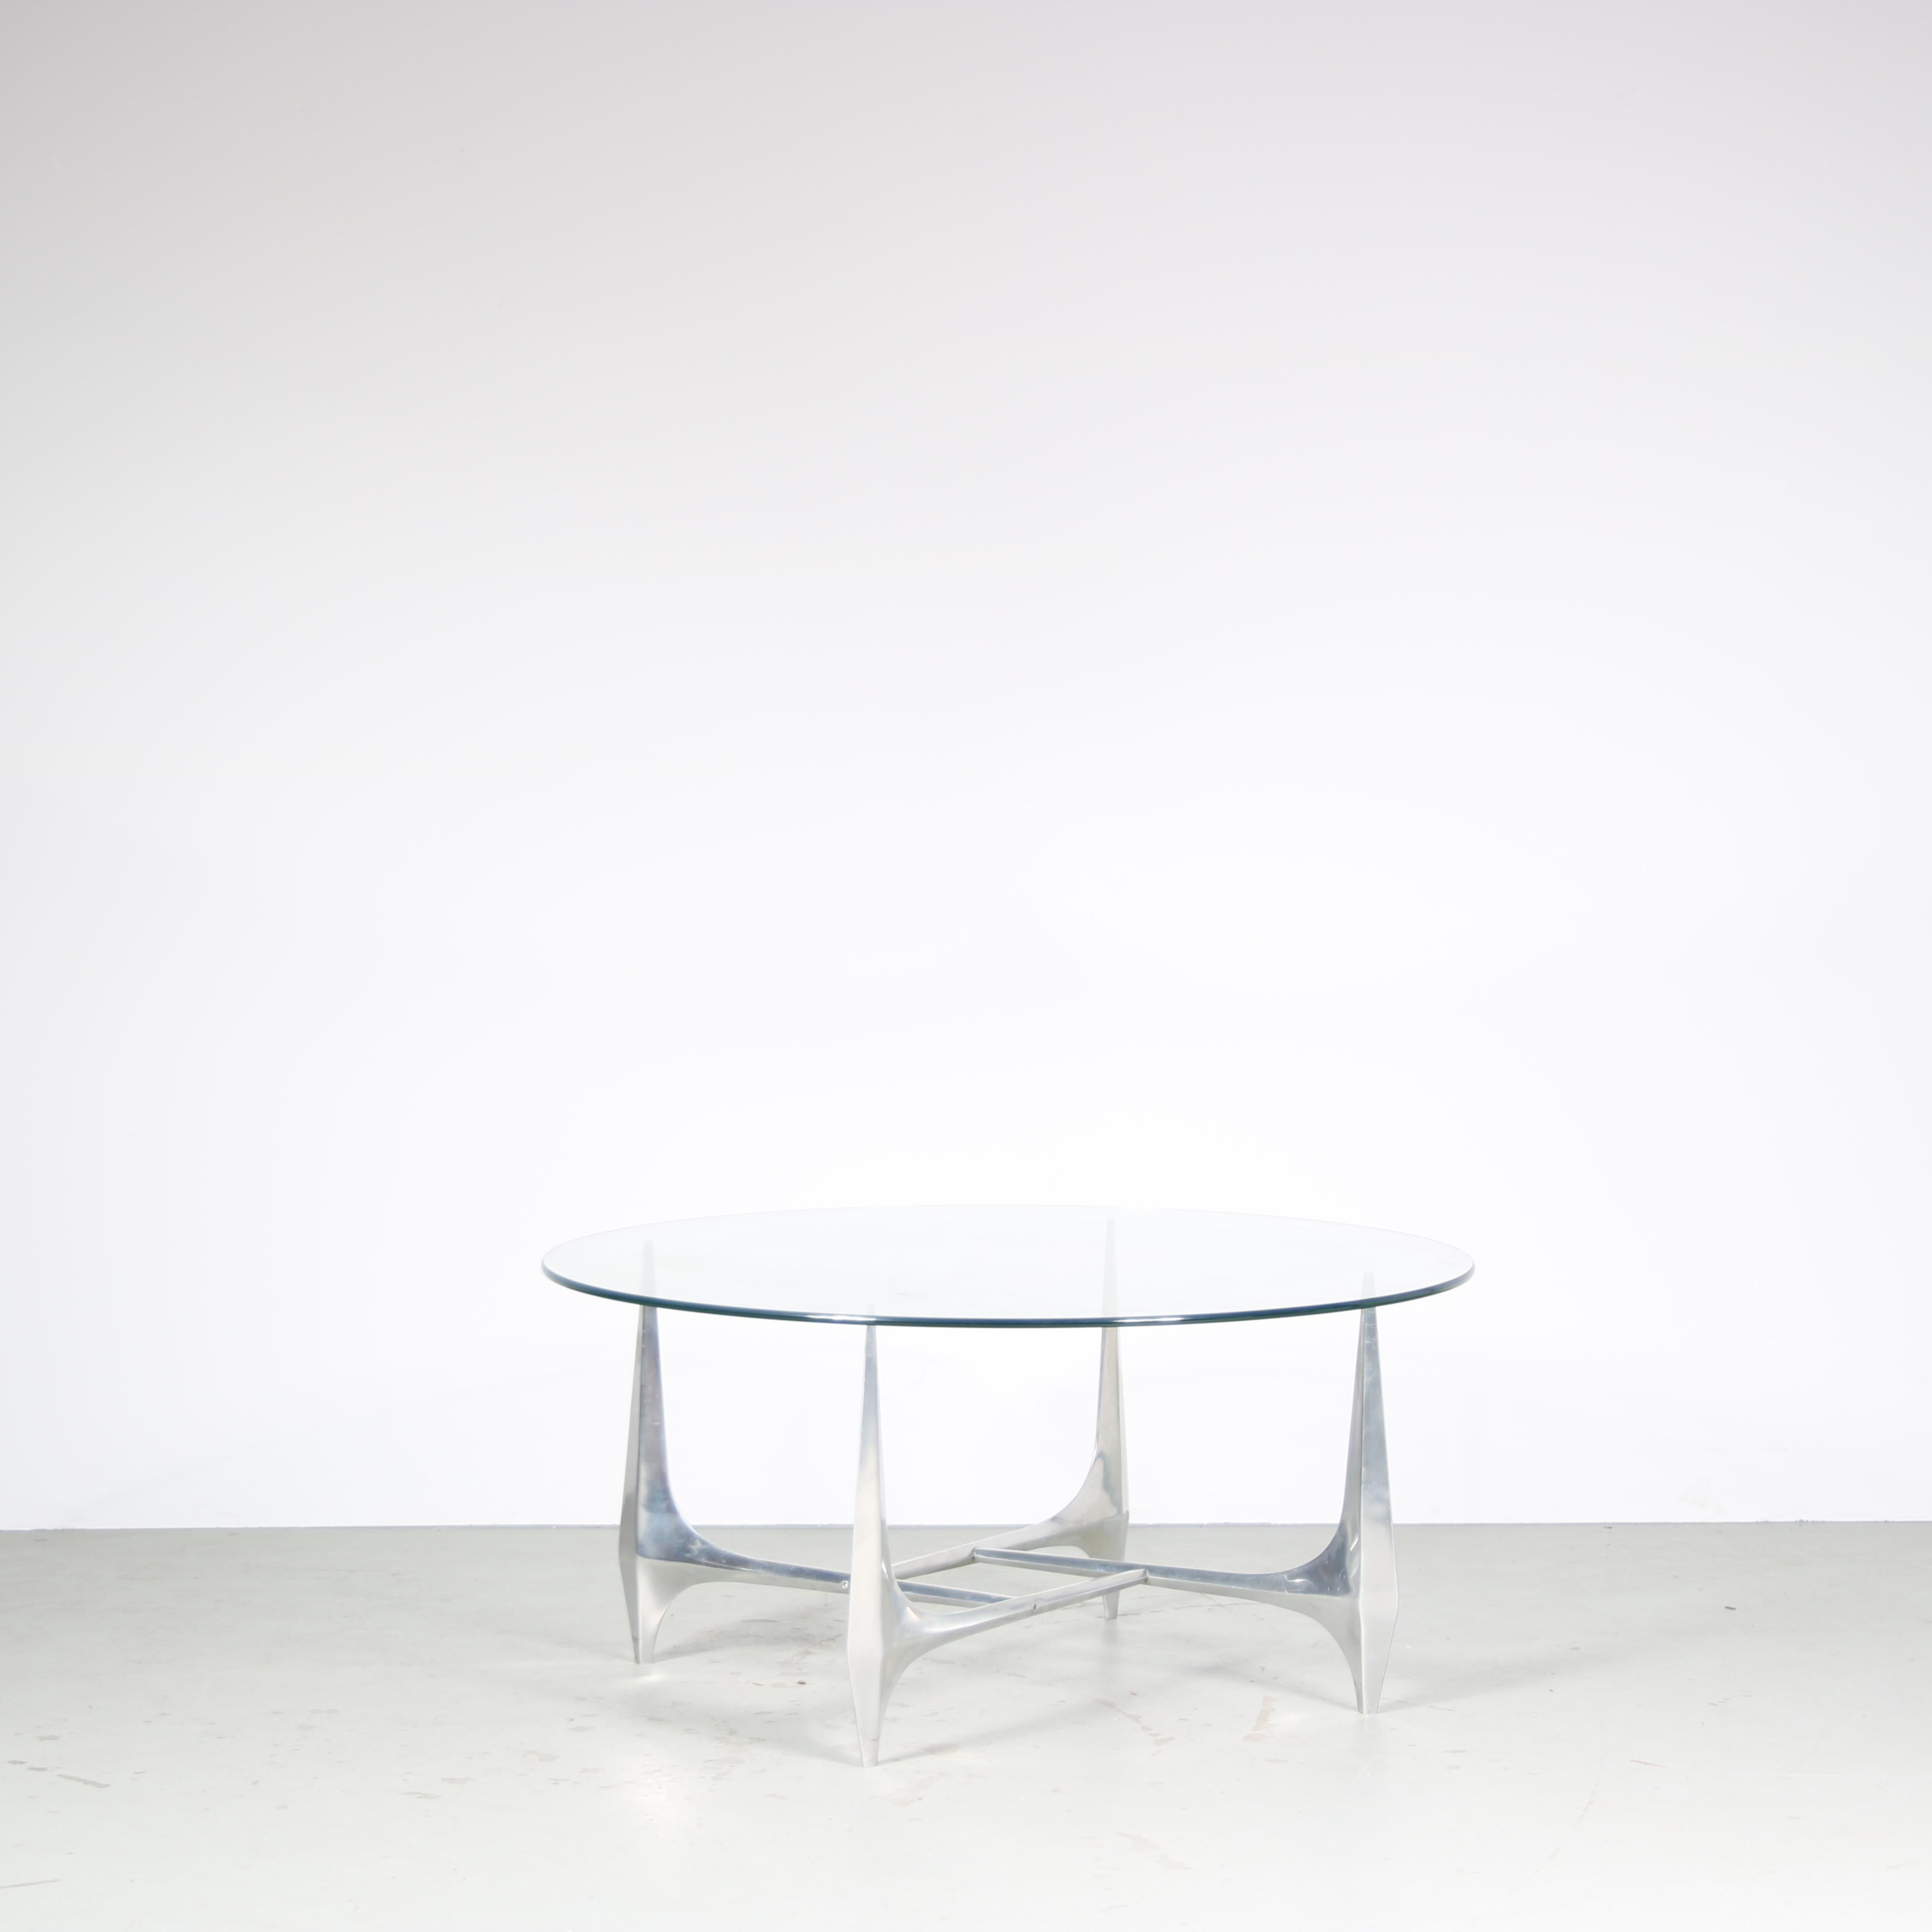 A beautiful coffee table, designed by Knut Hesterberg and manufactured by Ronald Schimdt in Germany around 1960.

This eye-catching table has an aluminium base, in elegant shape with each leg coming together in a beautiful square center. The round,